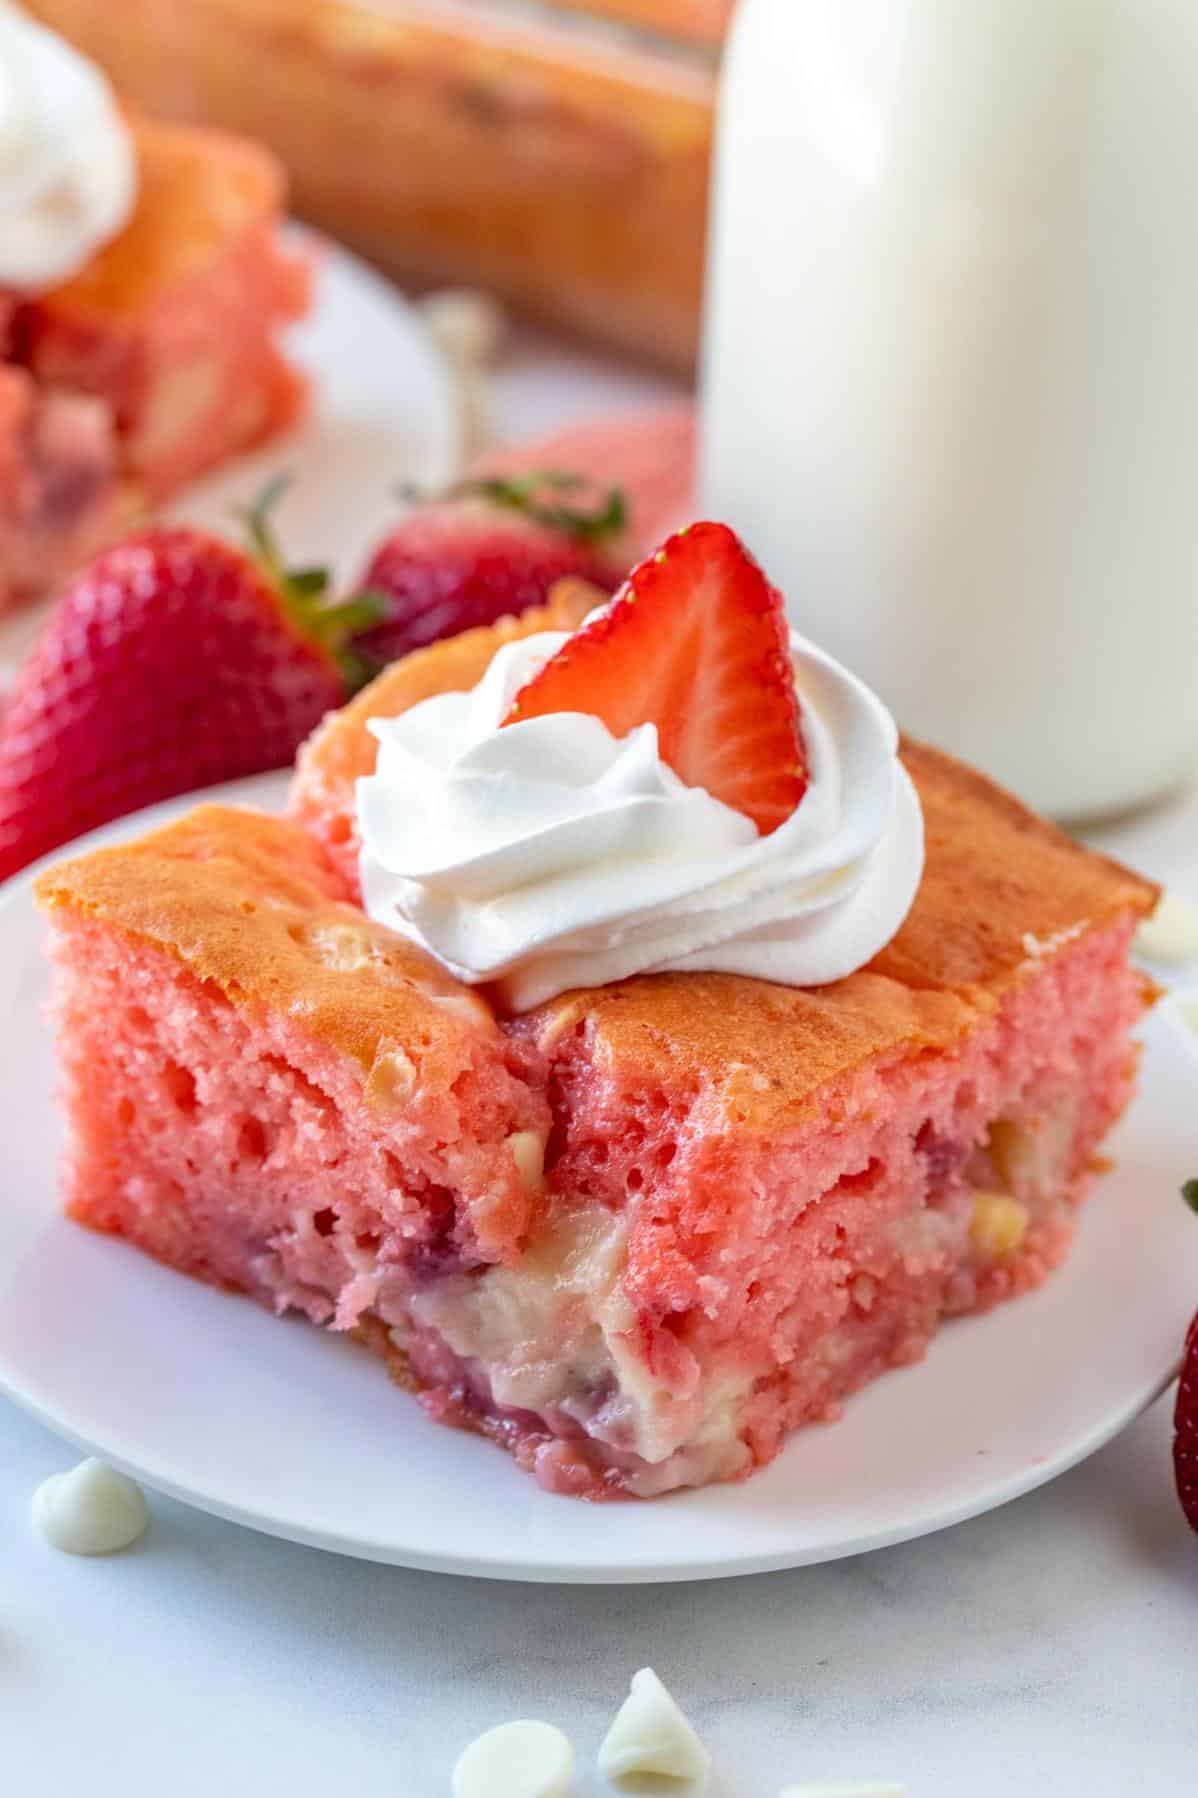  Say goodbye to boring desserts and hello to this vibrant, delicious cake!